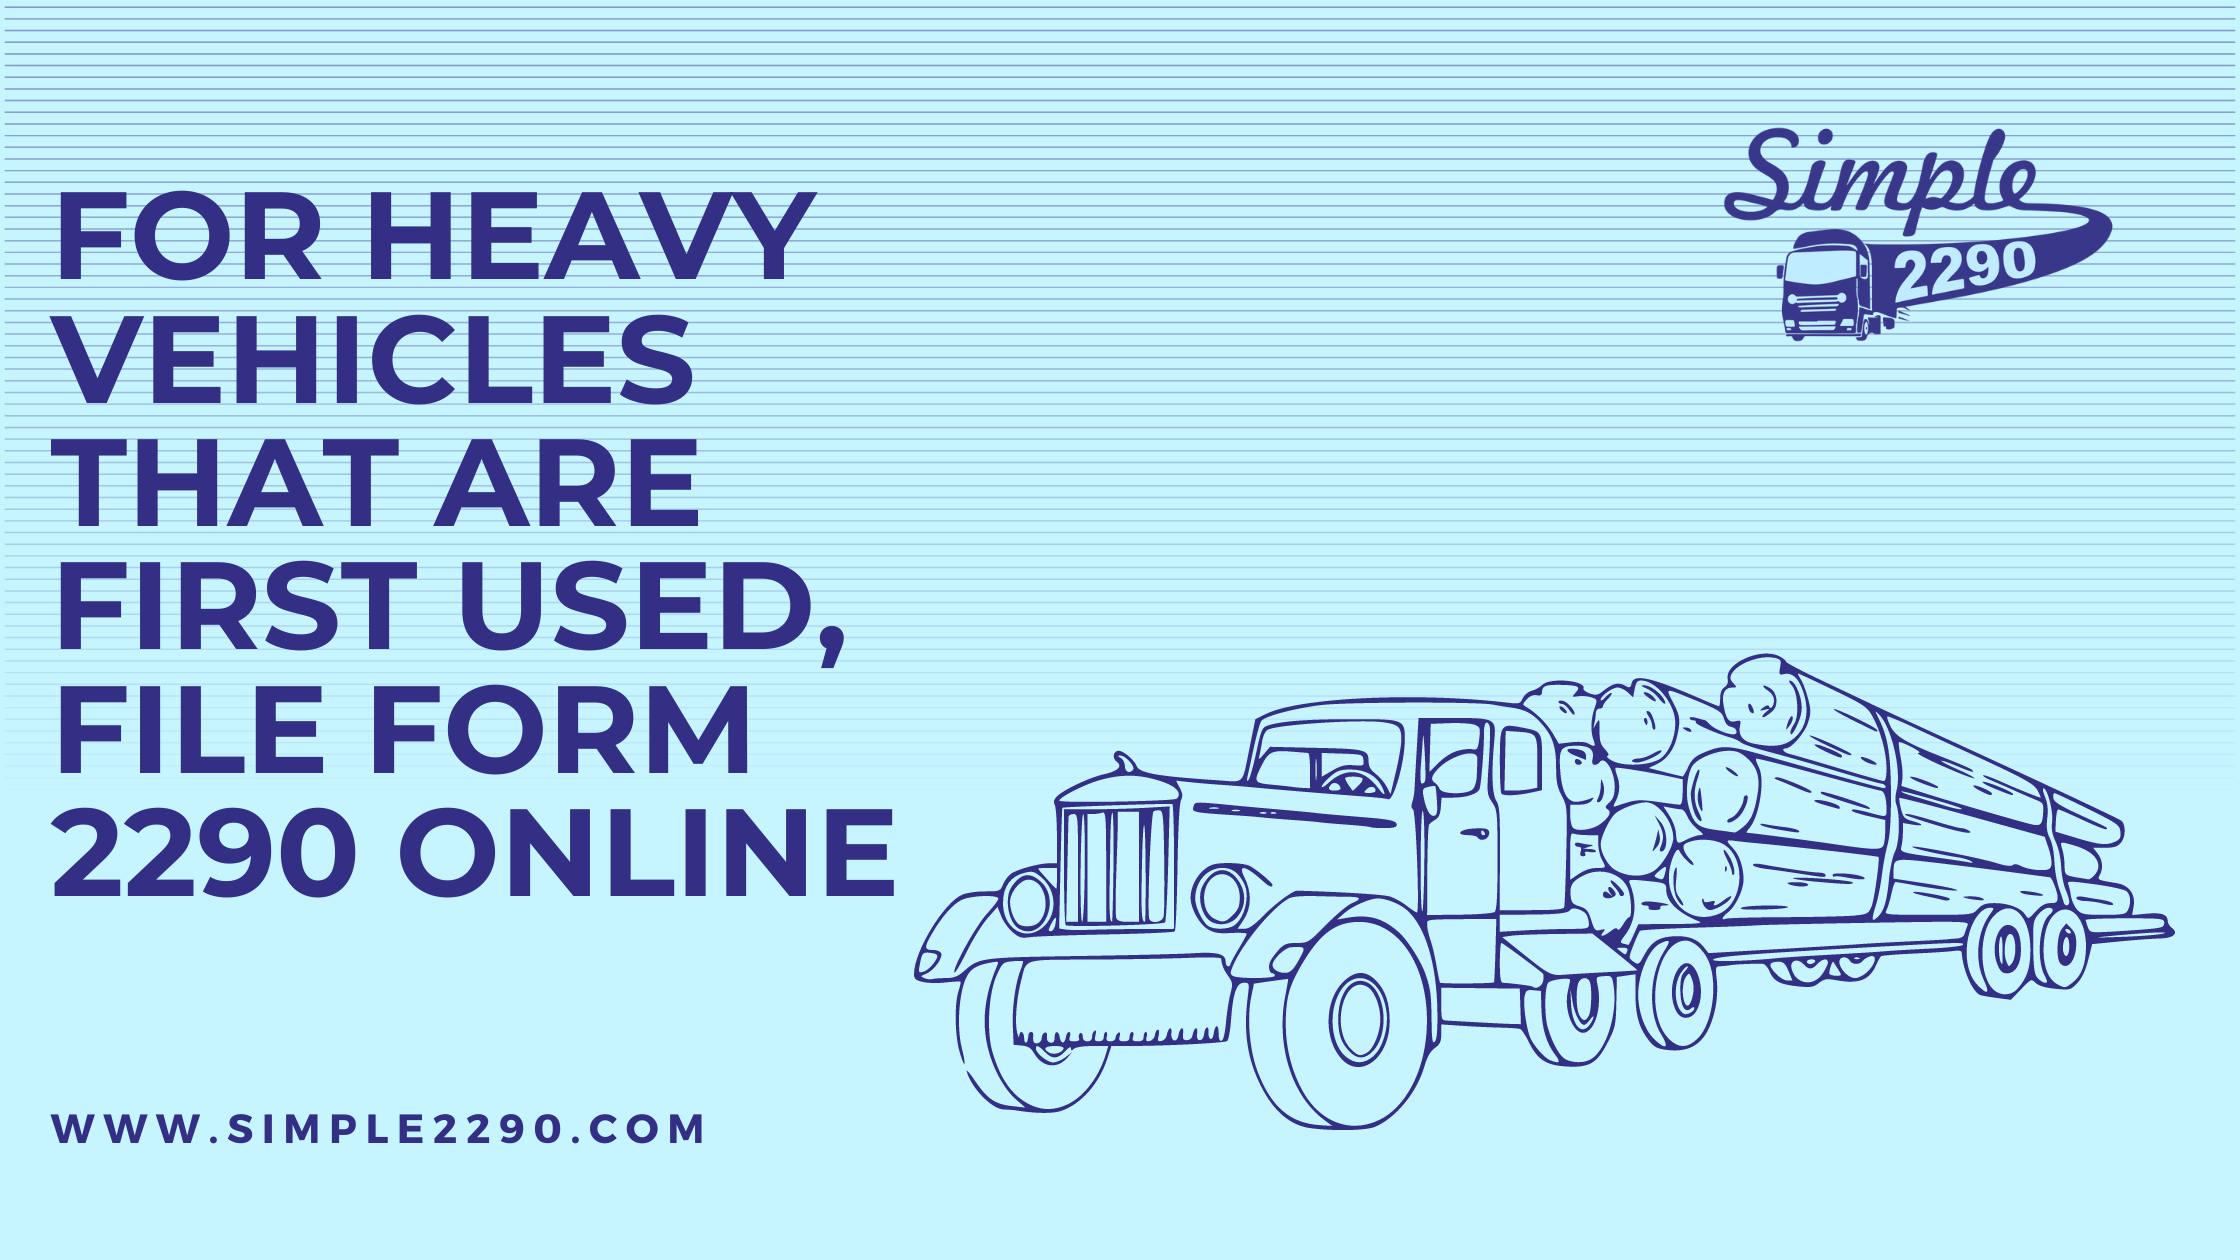  For heavy vehicles that are first used, file Form 2290 online